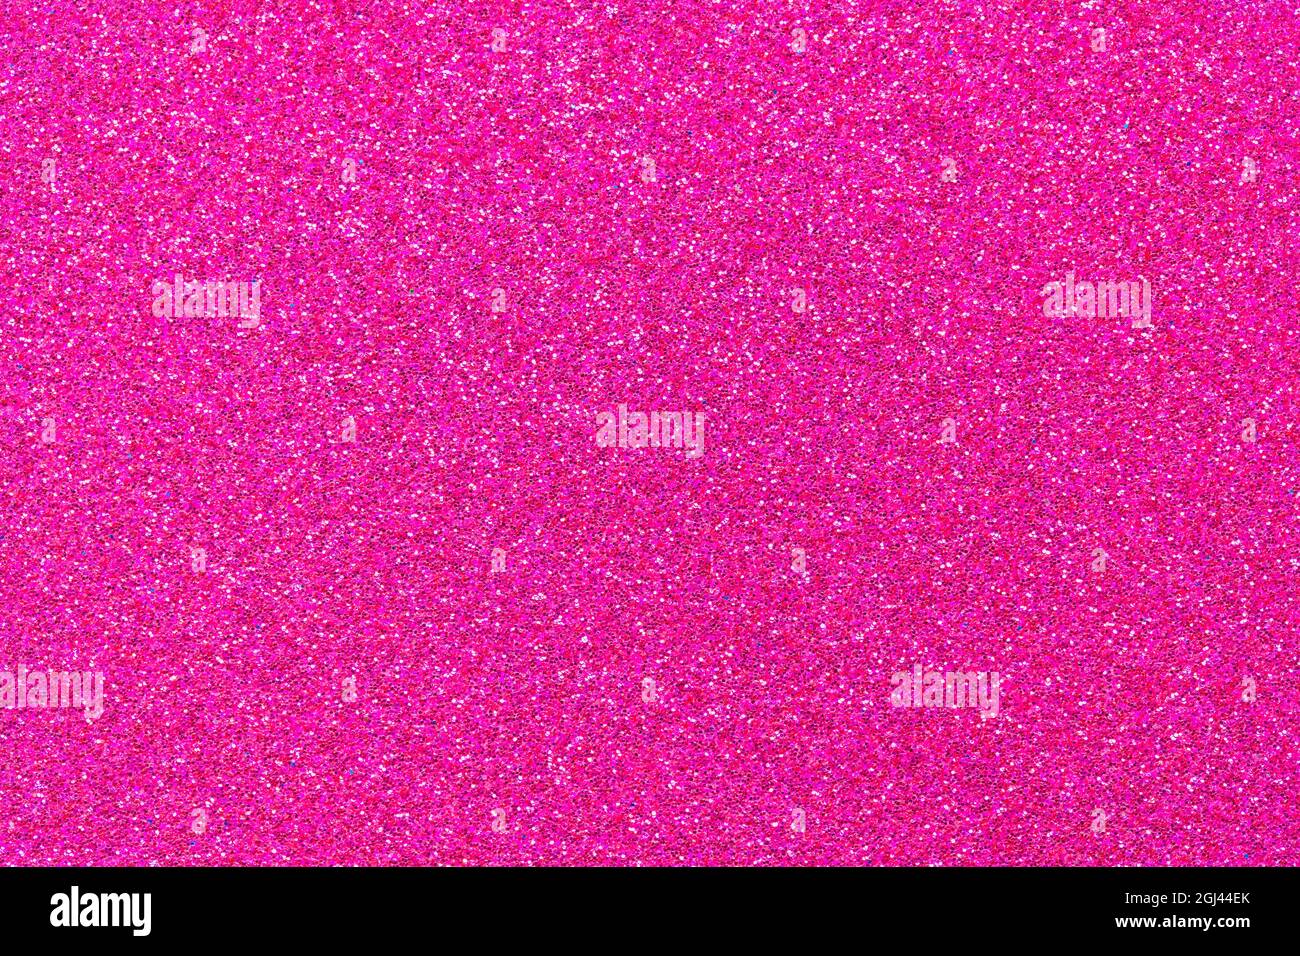 Pink Glitter Arts and Craft Background Texture Stock Photo